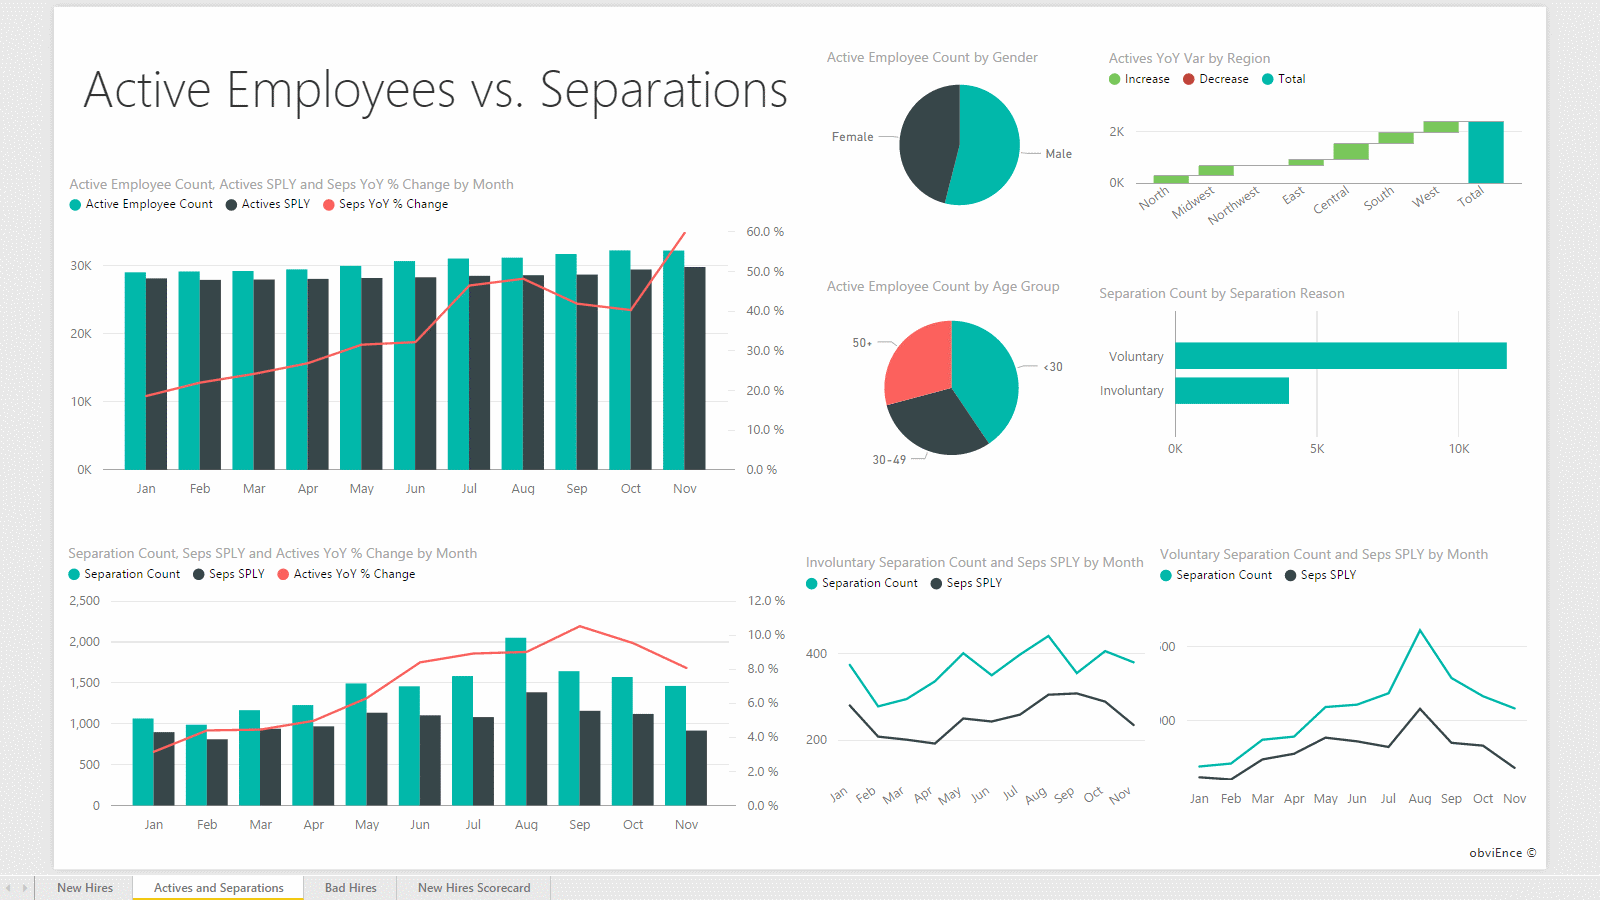 Report: Actives and Separations